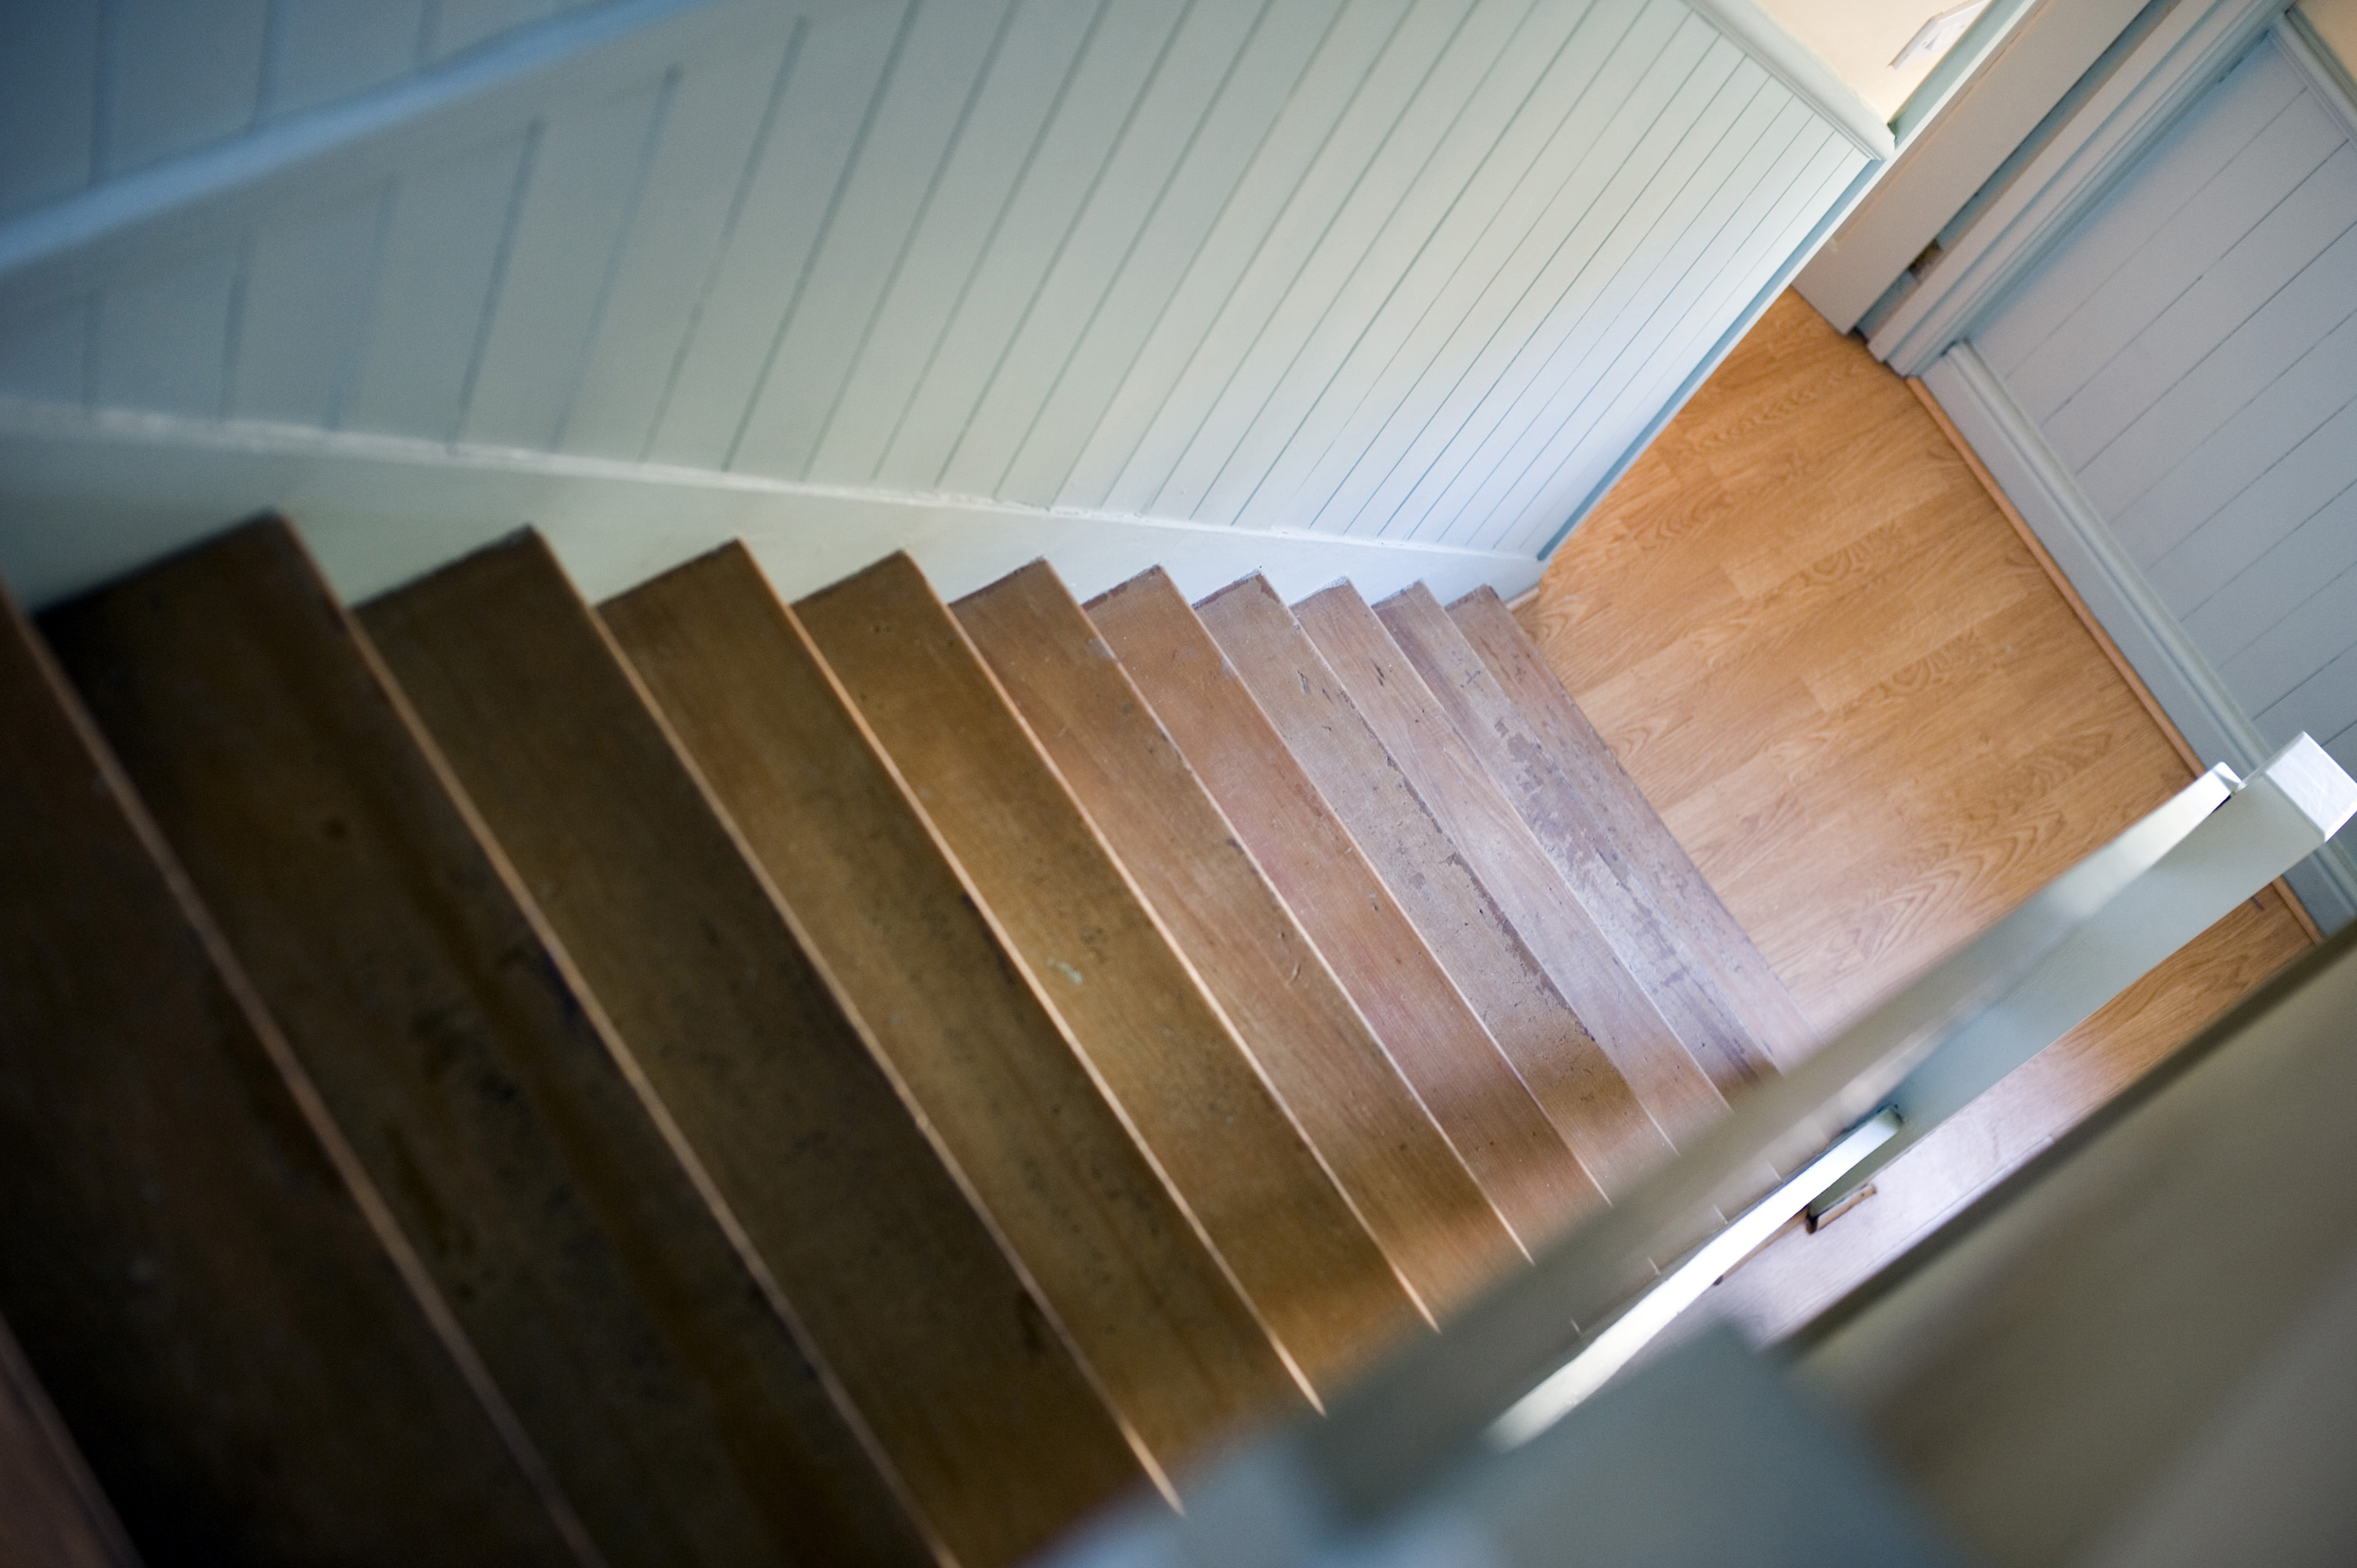 Looking Down A Flight Of Stairs-3896 | Stockarch Free Stock Photos